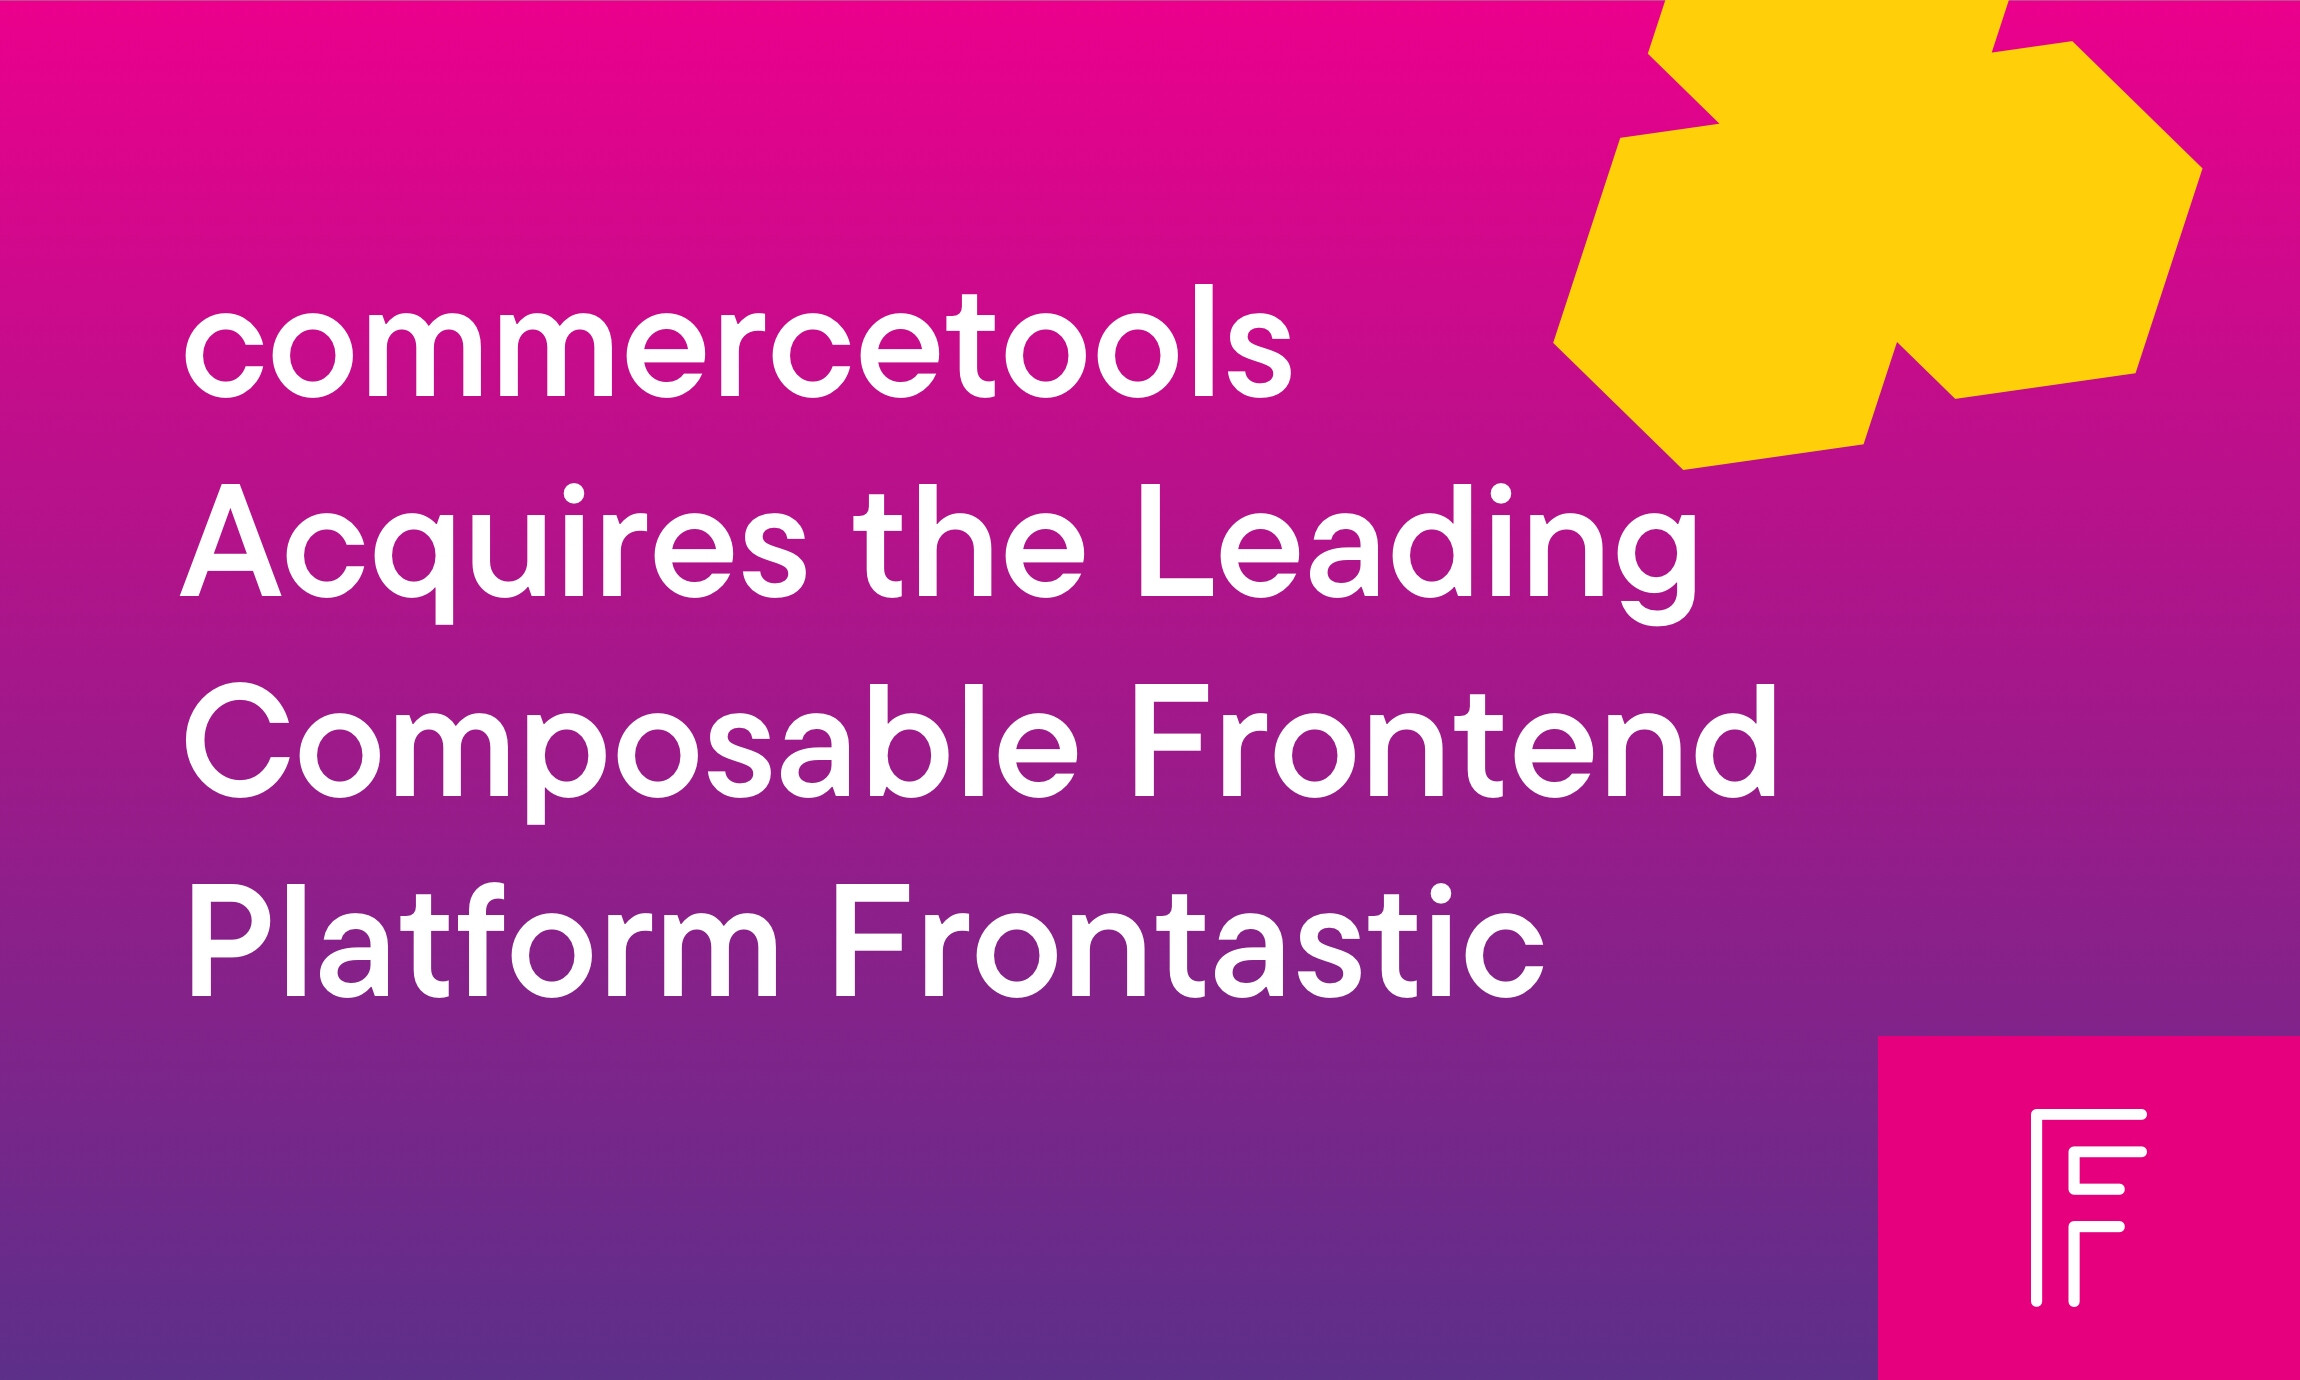 commercetools Acquires the Leading Composable Frontend Platform Frontastic